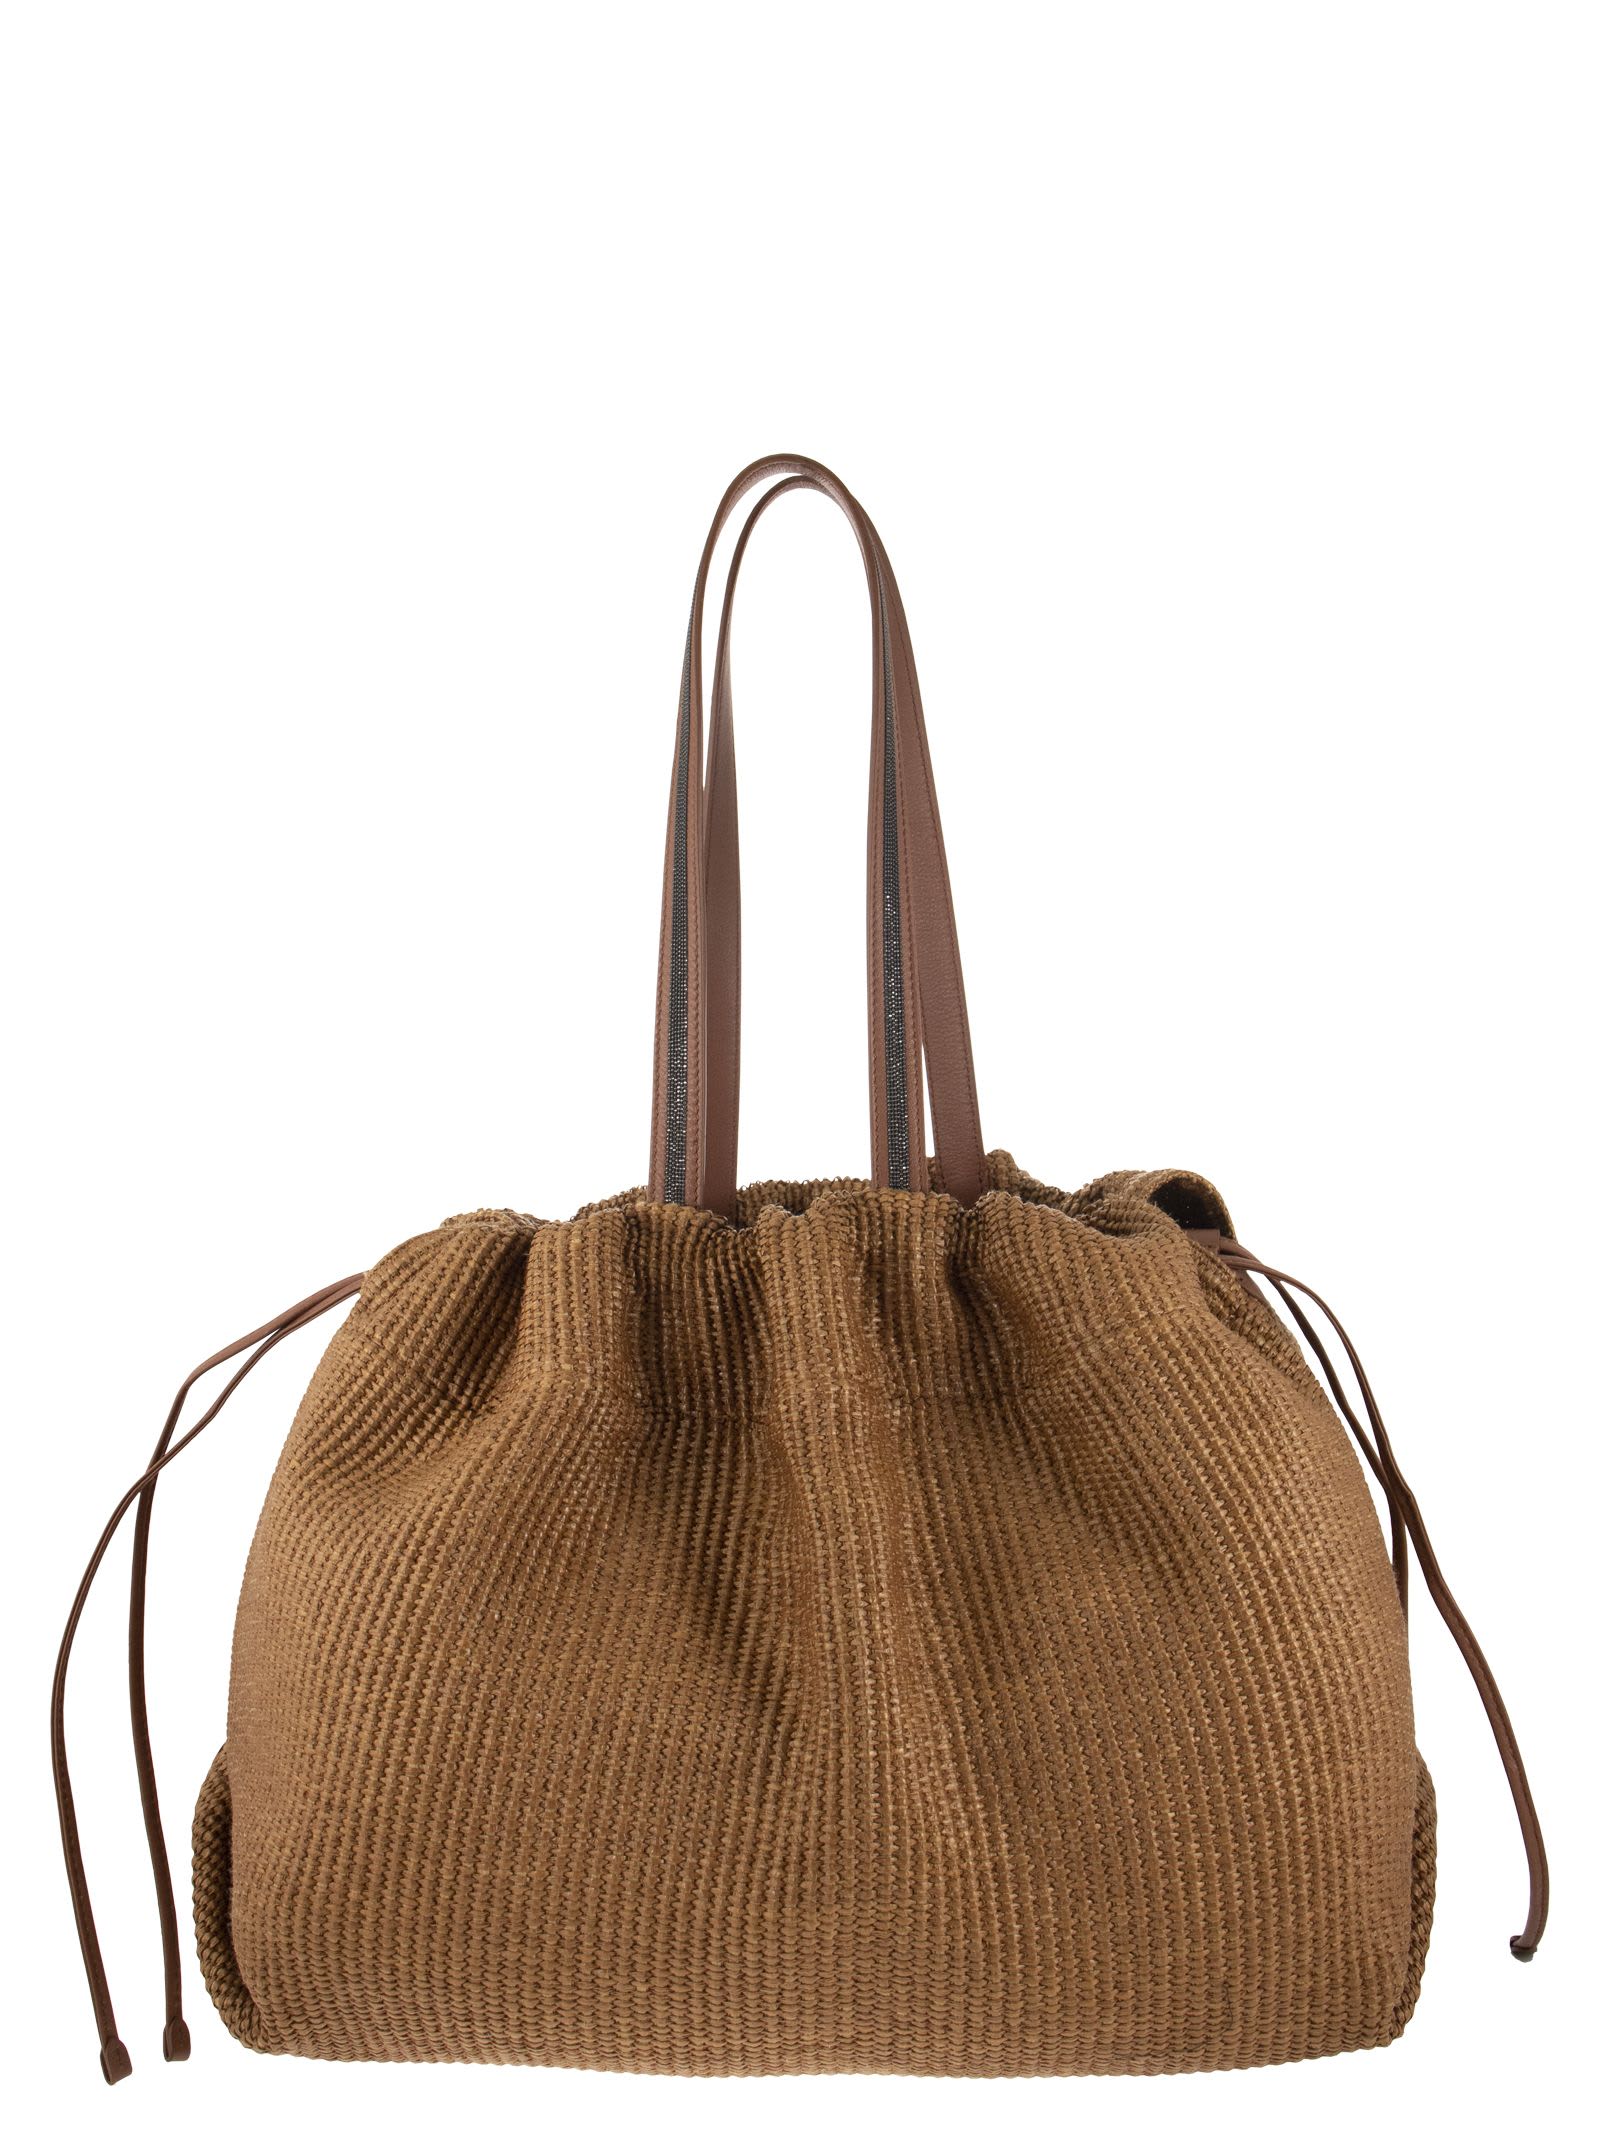 Brunello Cucinelli Fabric Shopper Bag With Shiny Handles